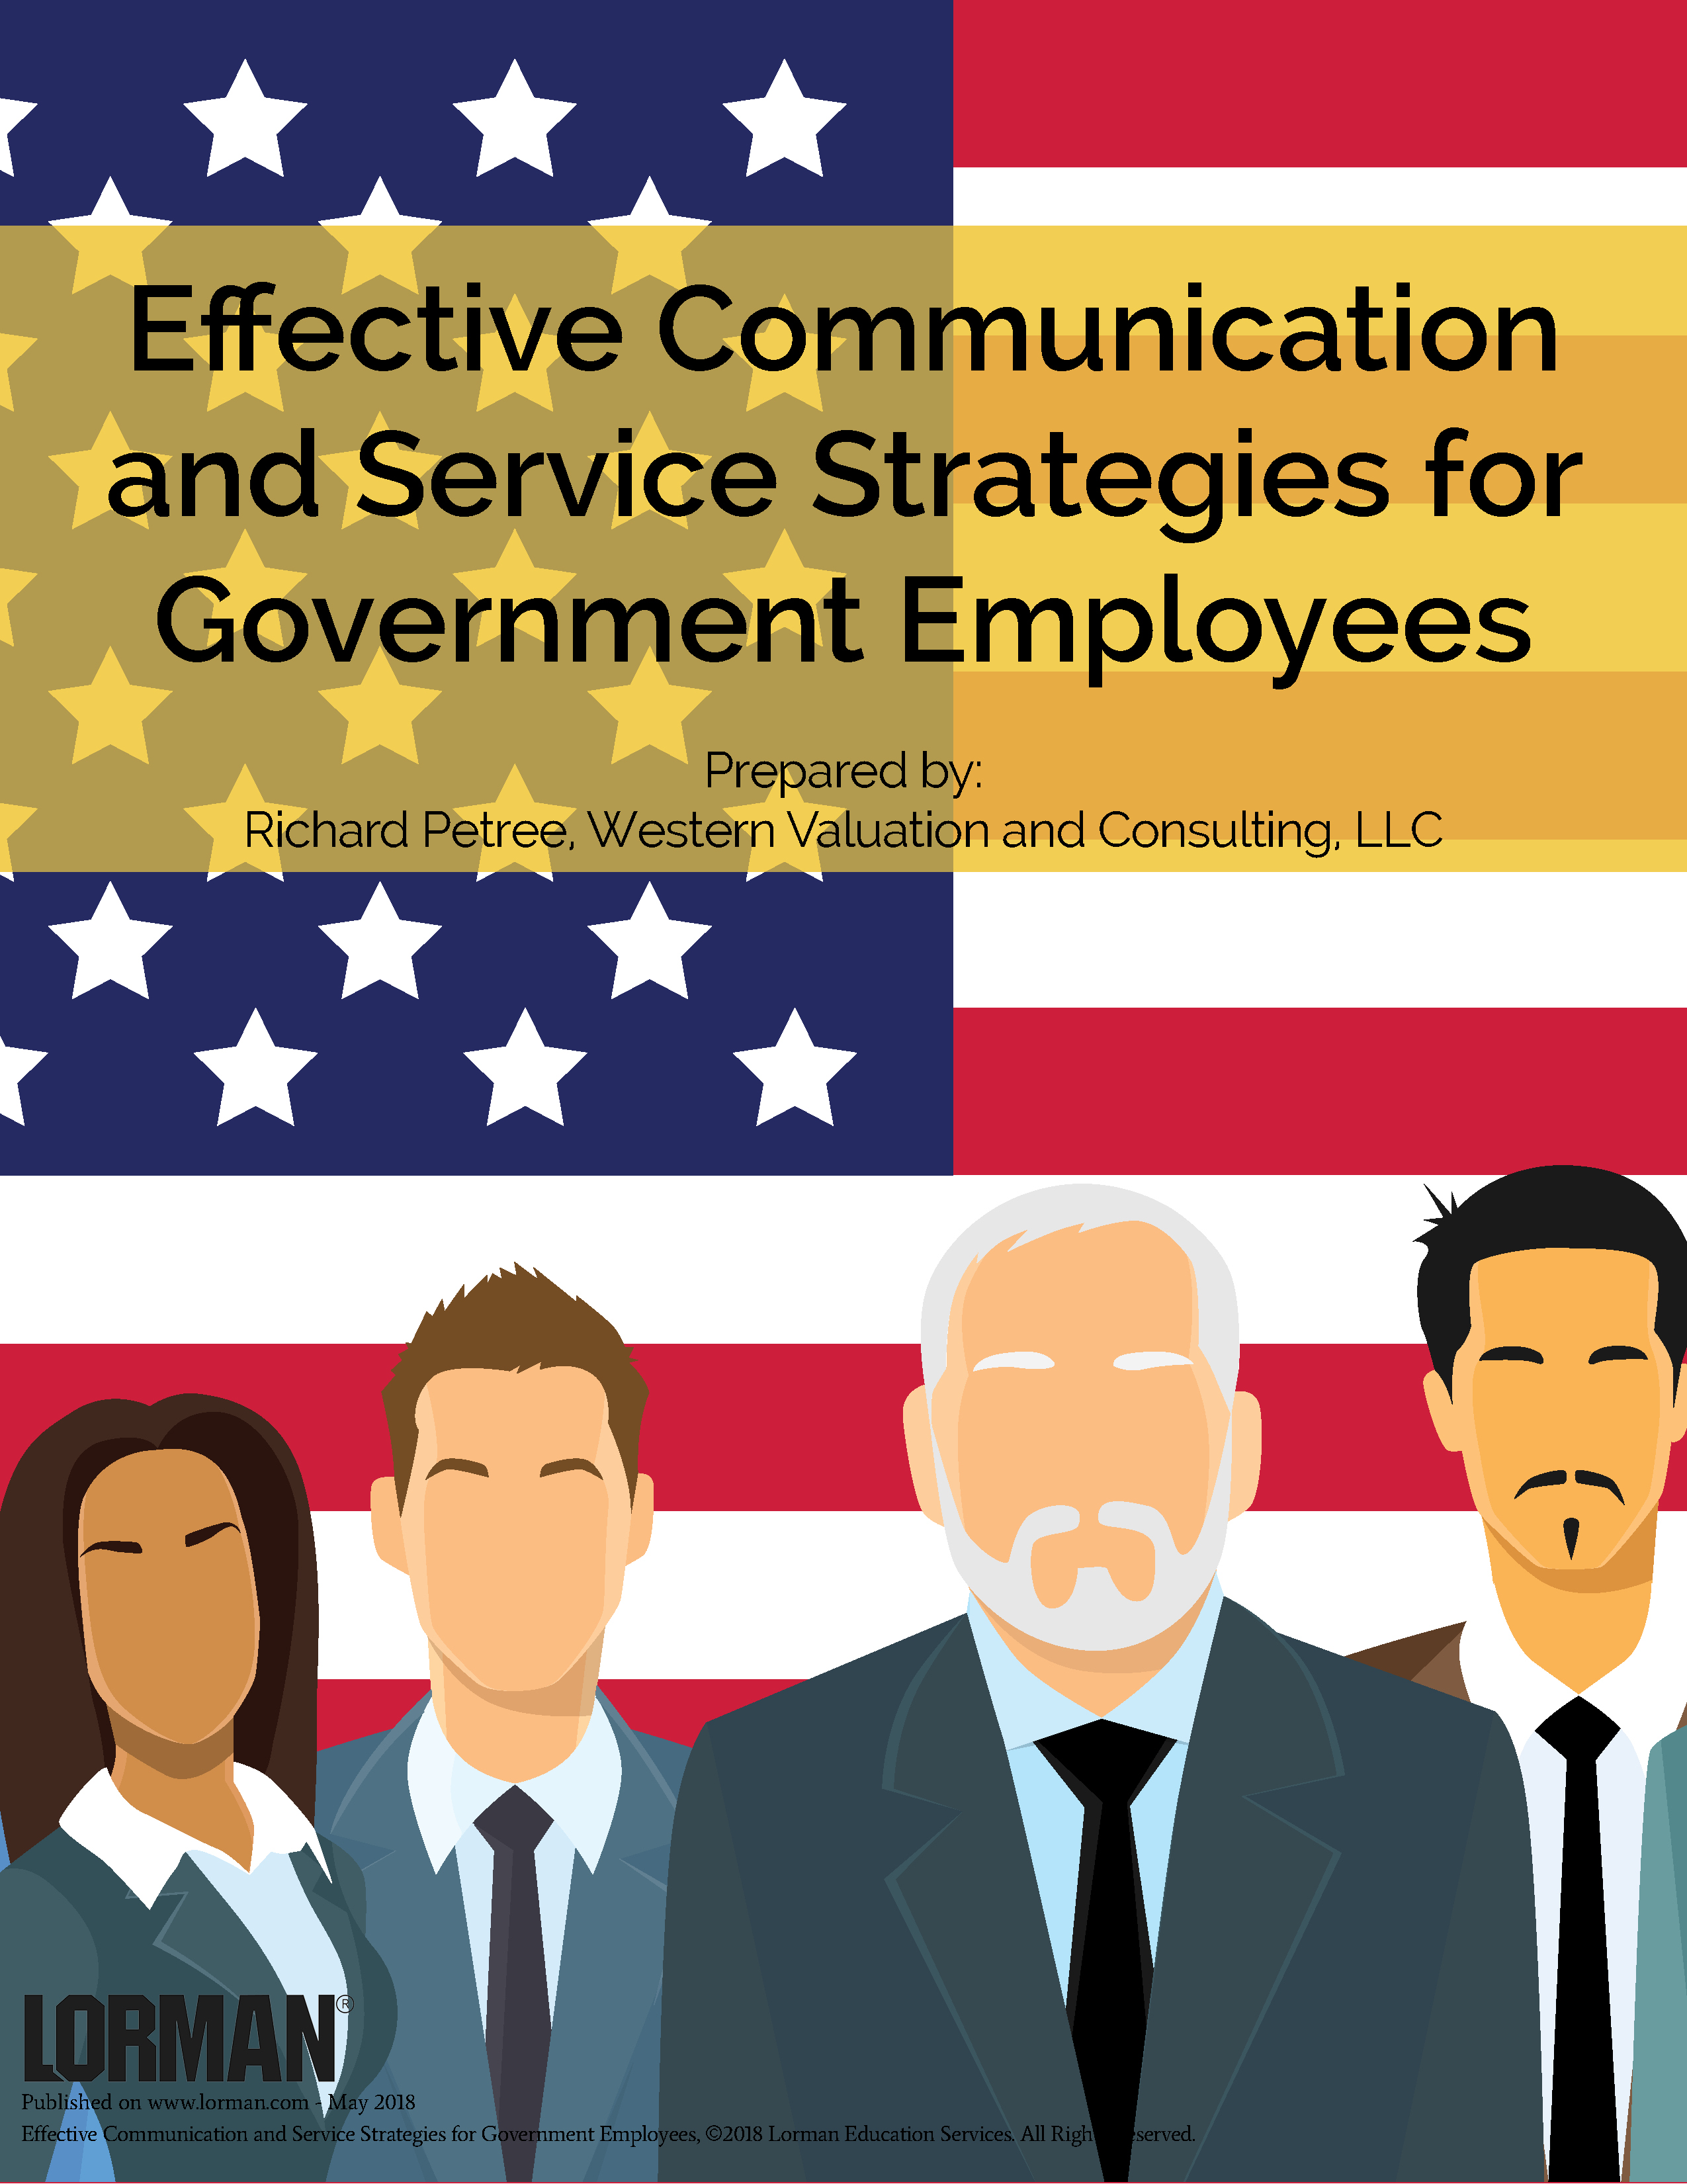 Effective Communication and Service Strategies for Government Employees